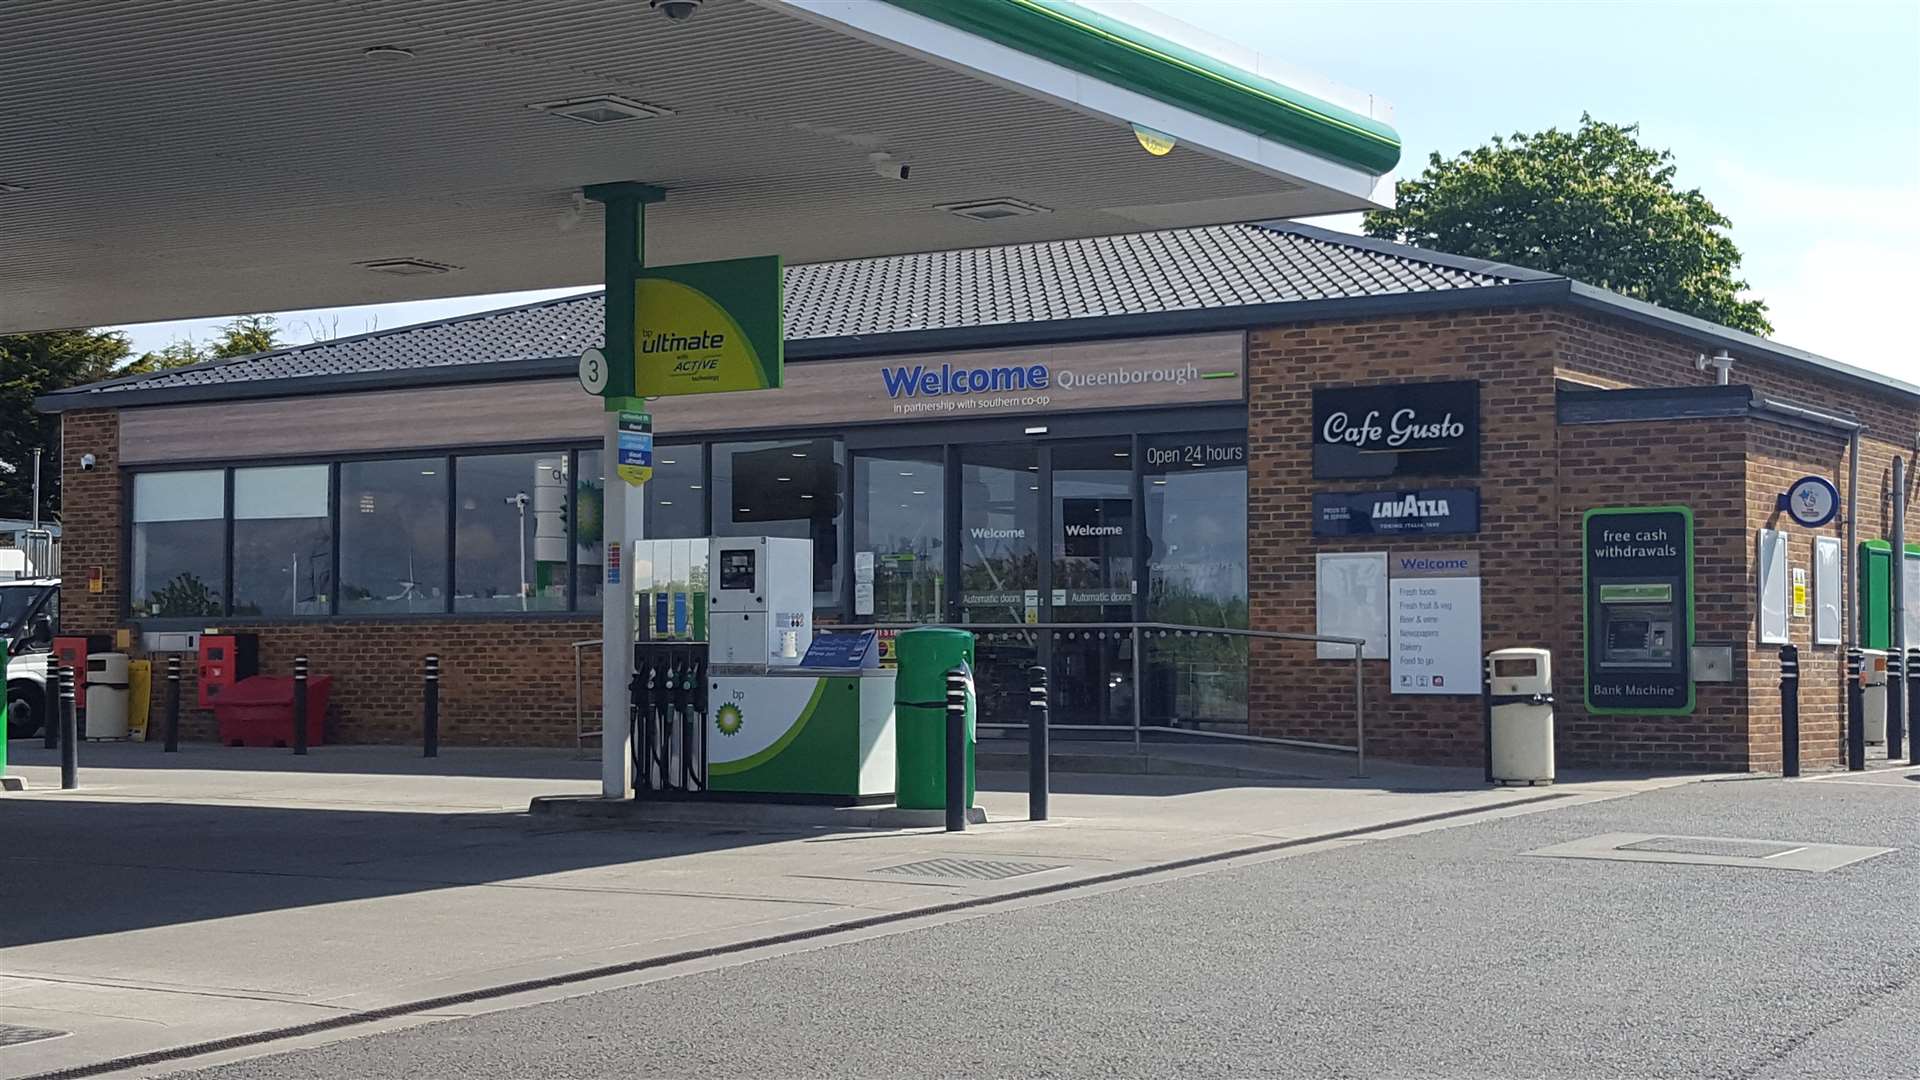 The shop at Queenborough services is about to re-open under a the Welcome brand